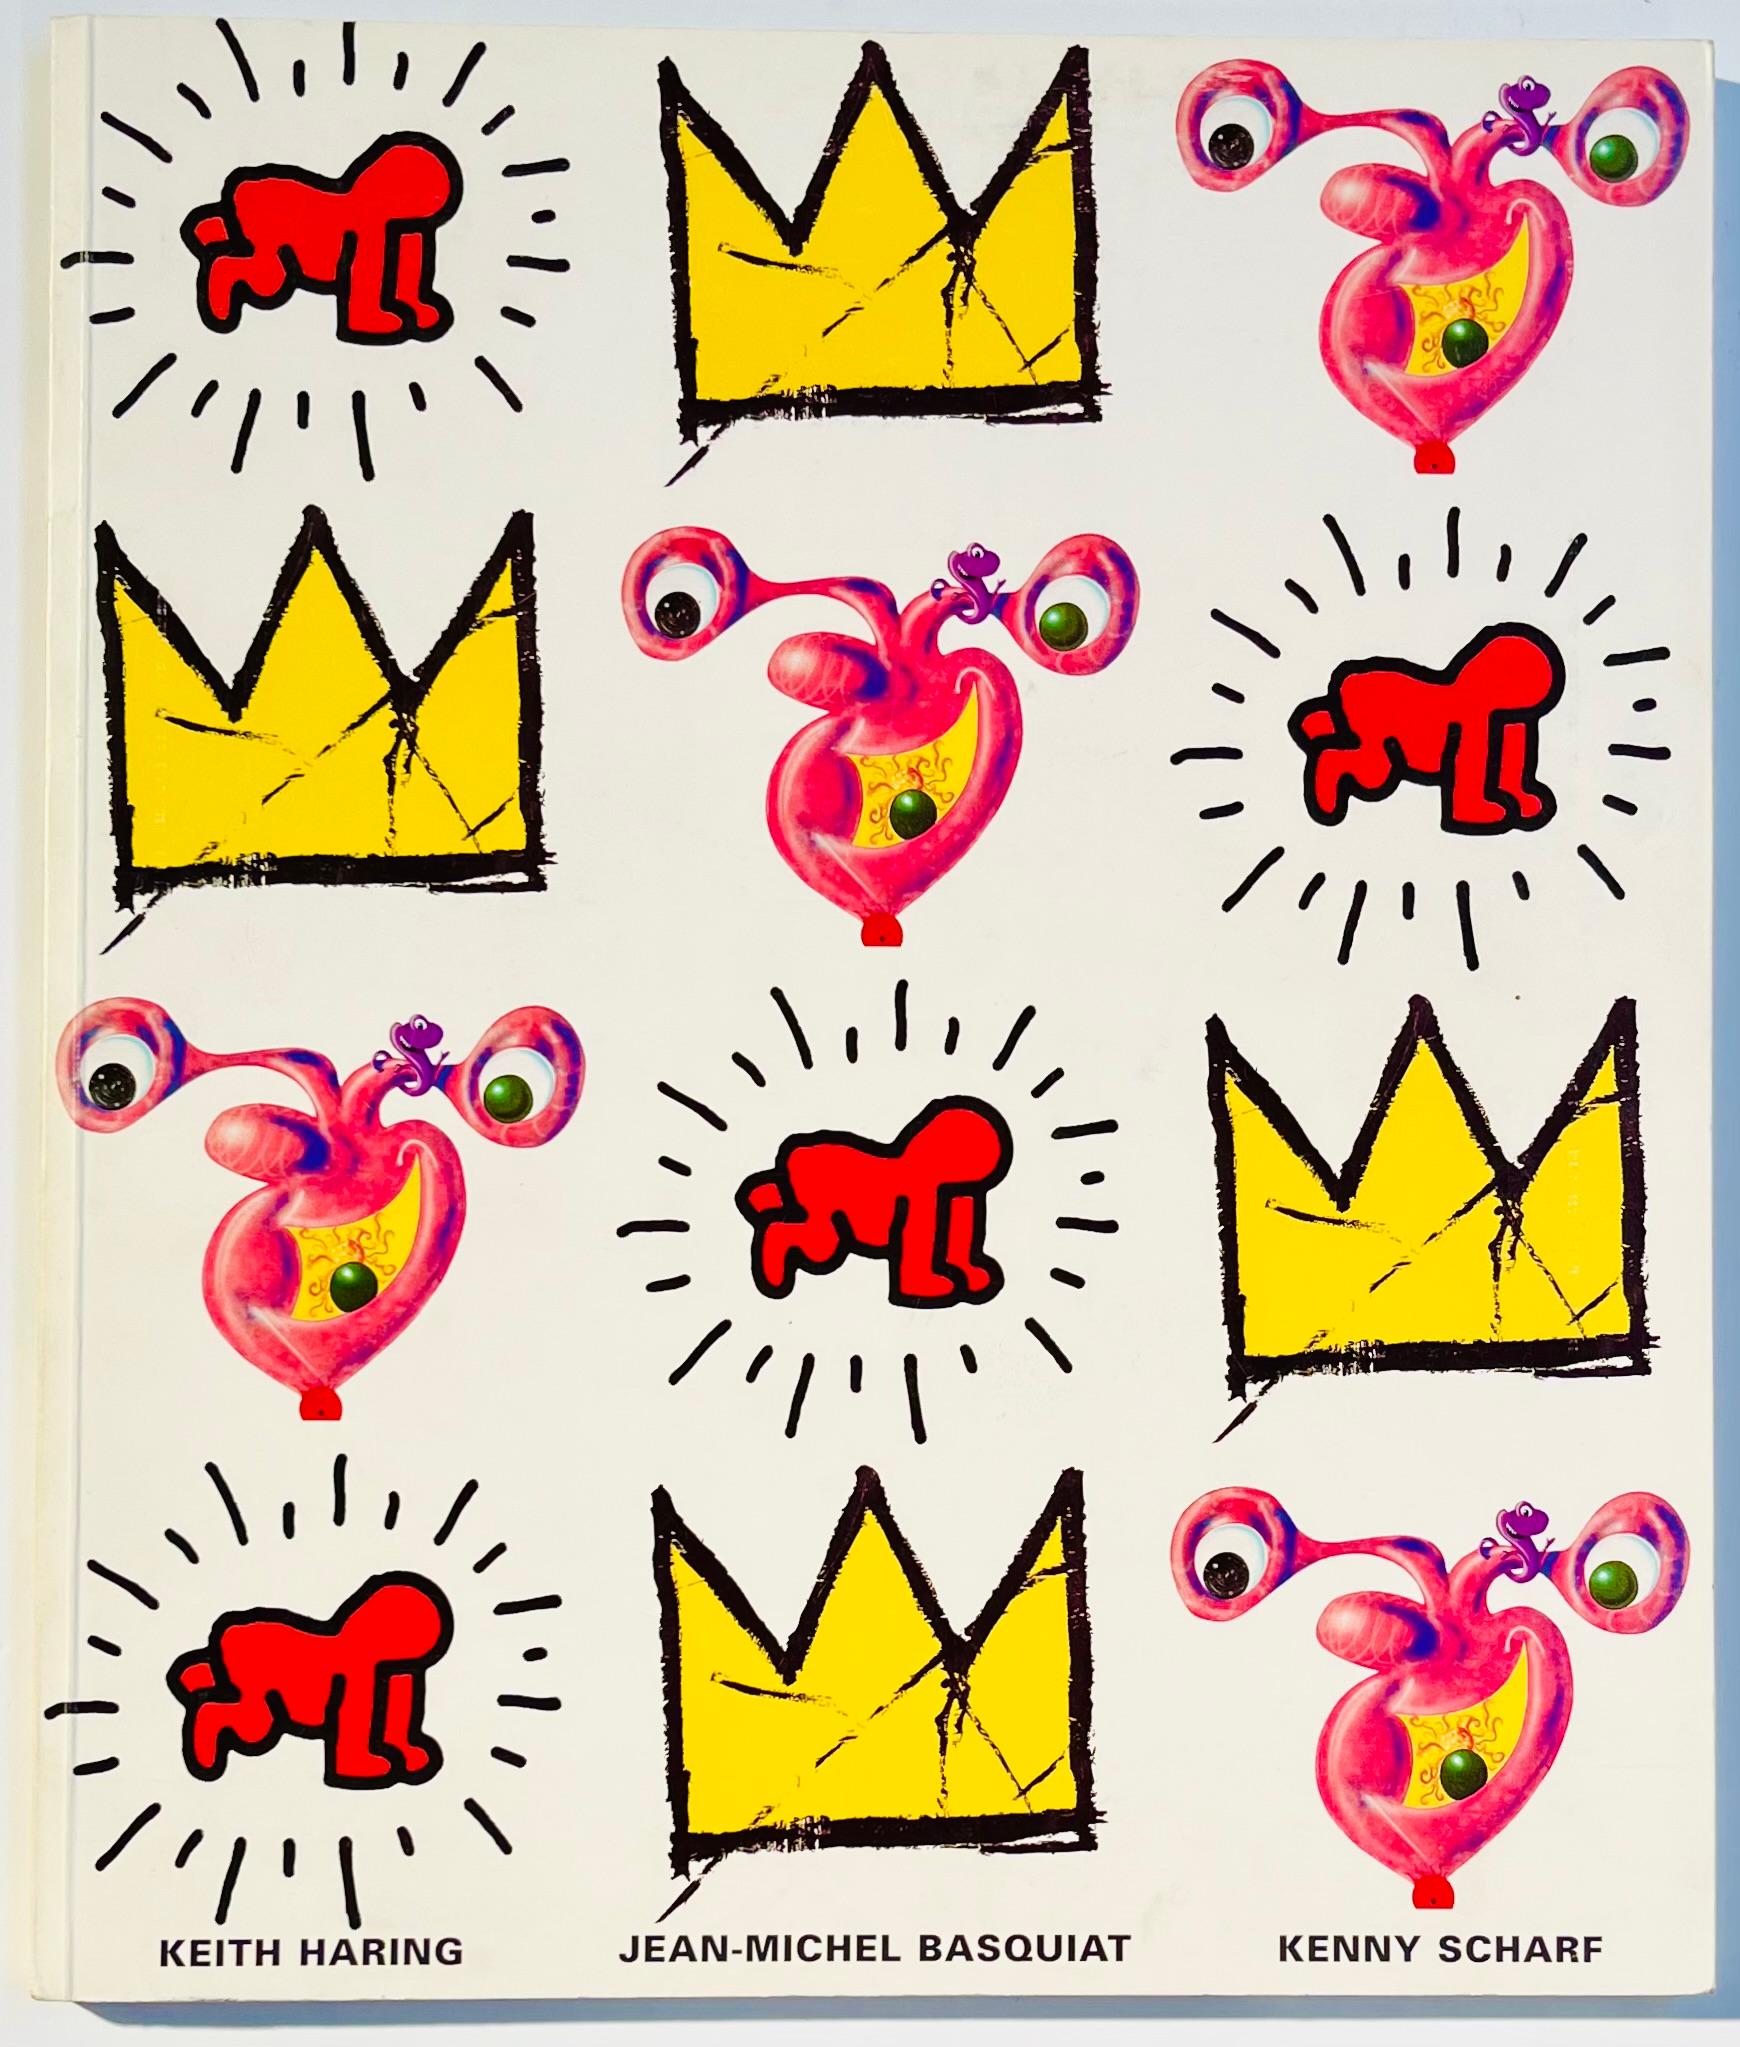 Kenny Scharf drawing 1998 (book drawing):
1990's Jean-Michel Basquiat, Keith Haring, Kenny Scharf exhibition catalogue featuring a signed & inscribed Kenny Scharf drawing. Further background: 

In 1997, parallel to the Keith Haring retrospective at